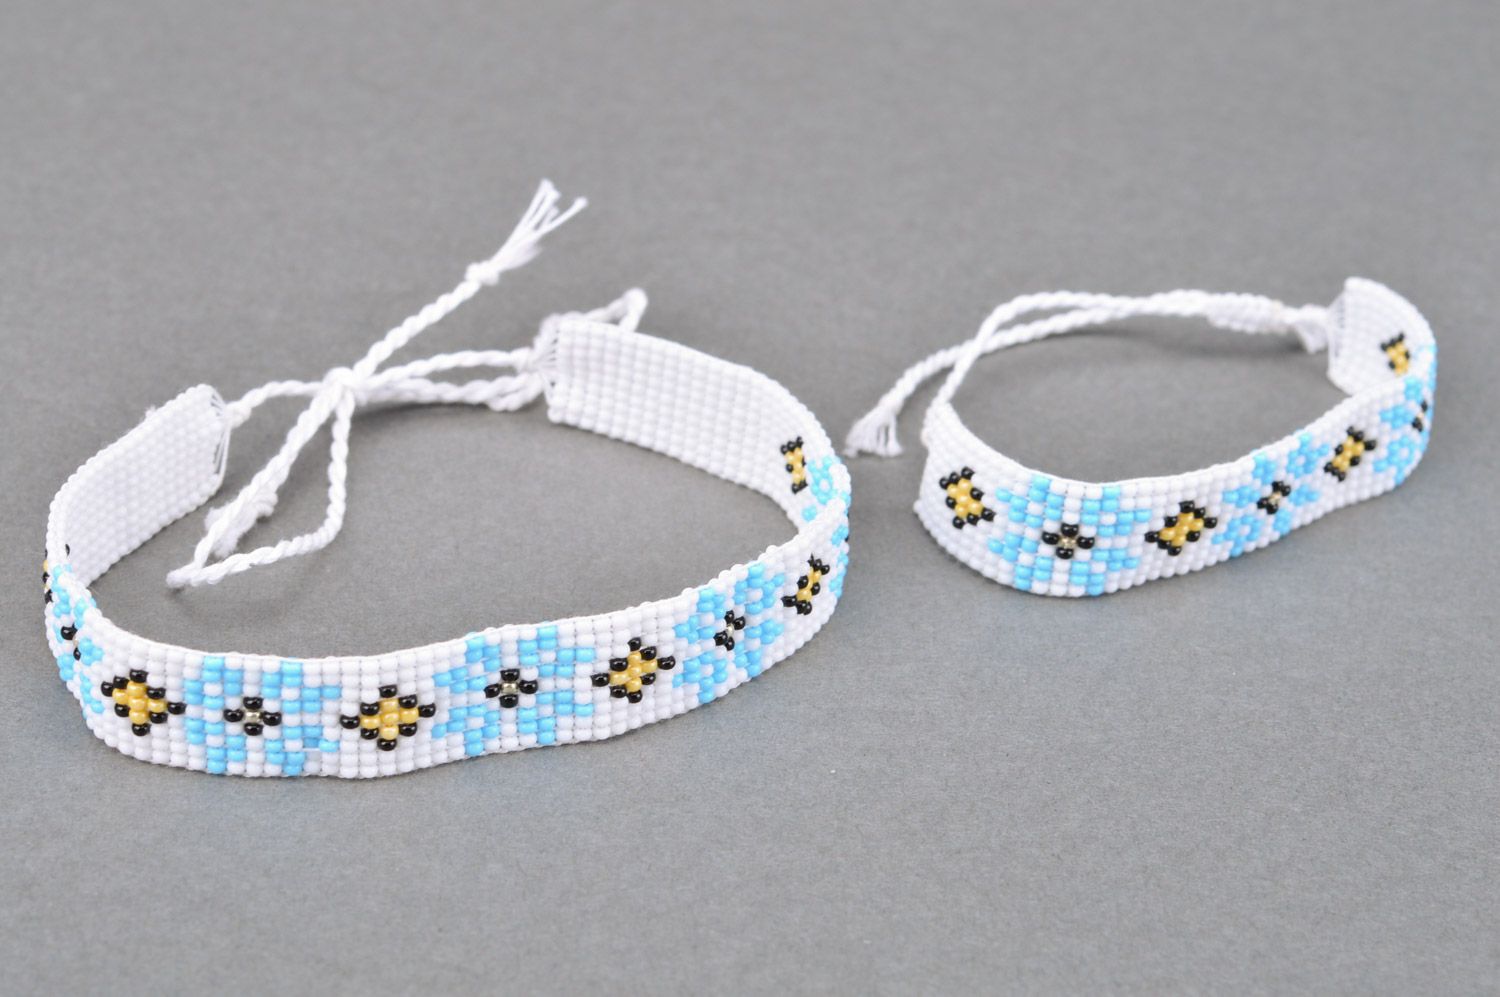 Handmade beaded jewelry set of light color 2 items woven bracelet and necklace photo 2